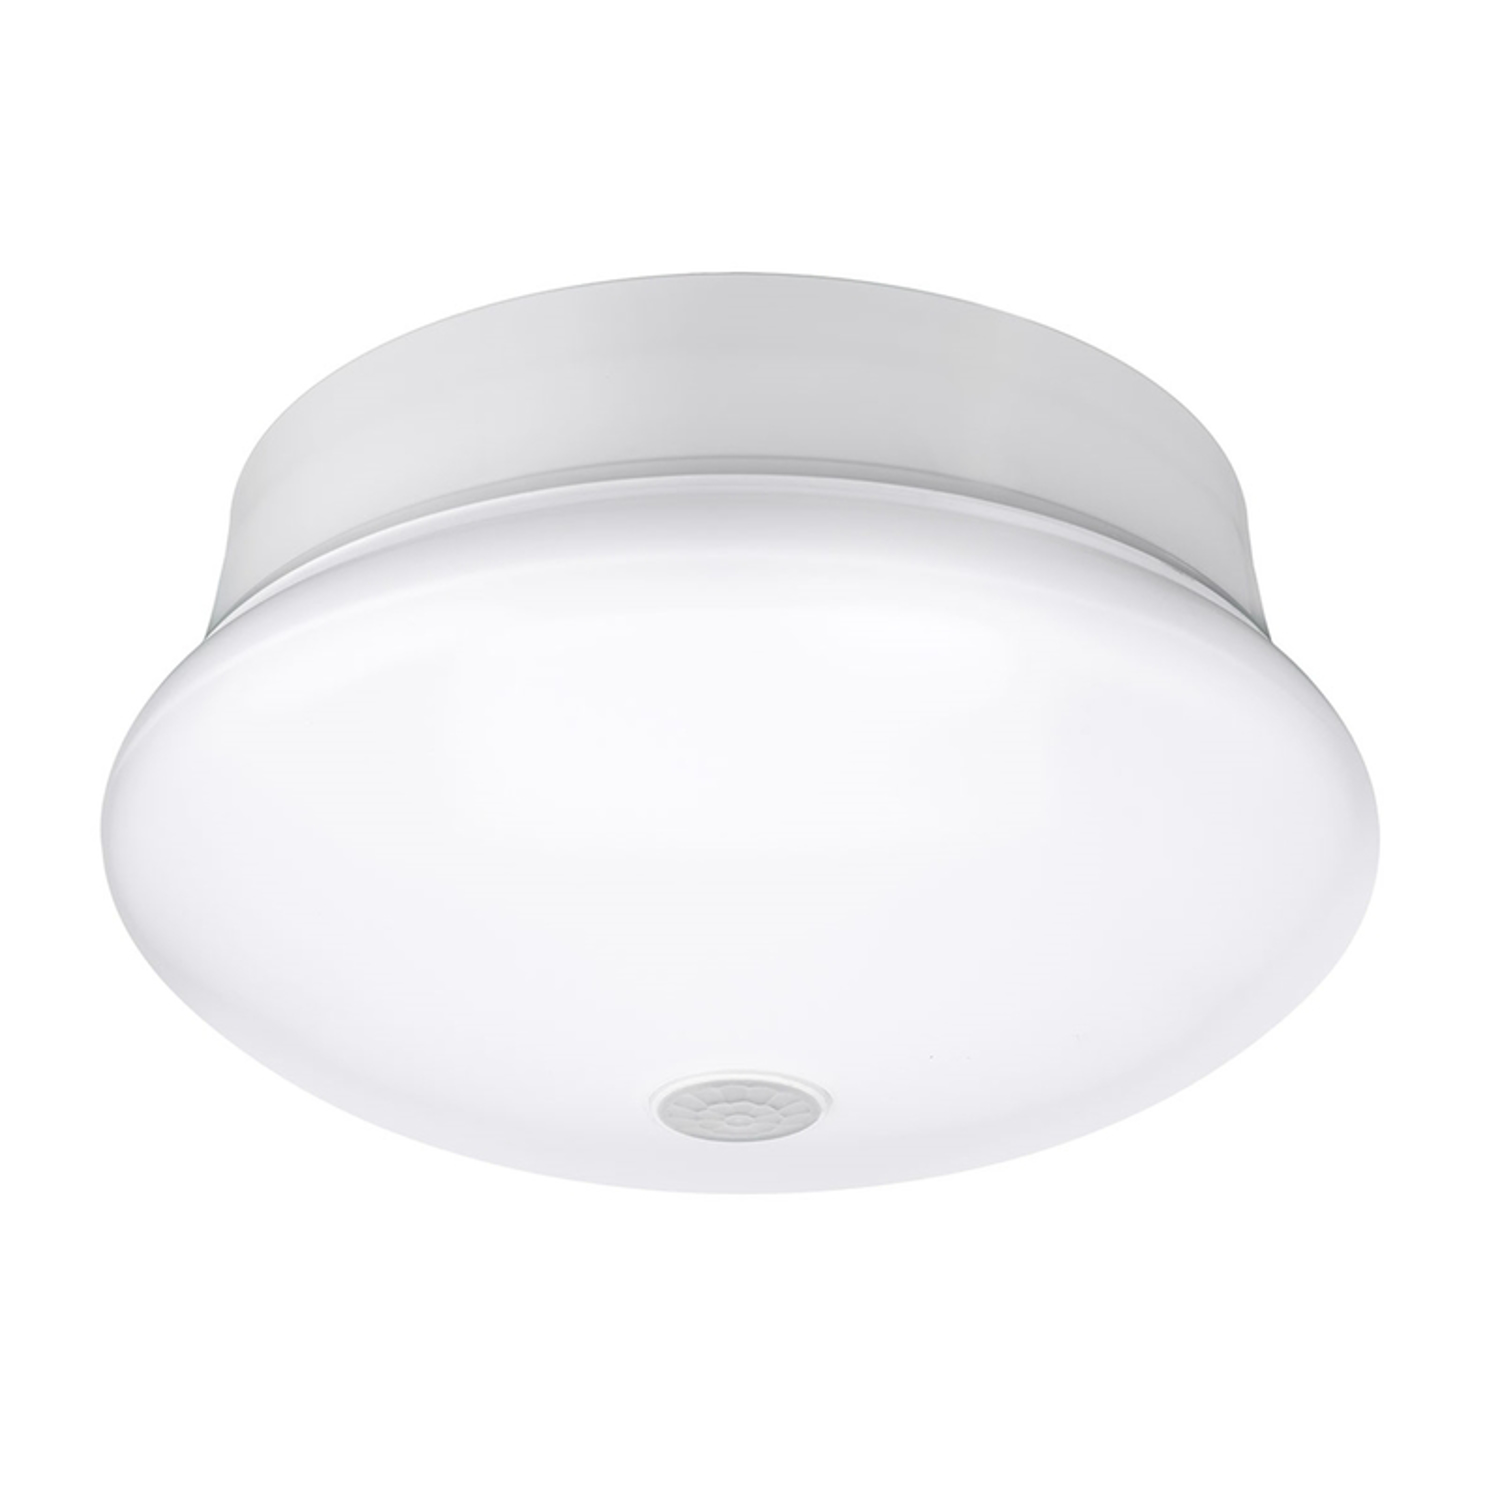 Photos - Chandelier / Lamp ETI Spin Light 3.54 in. H X 7 in. W X 7 in. L White LED Ceiling Spin Light 